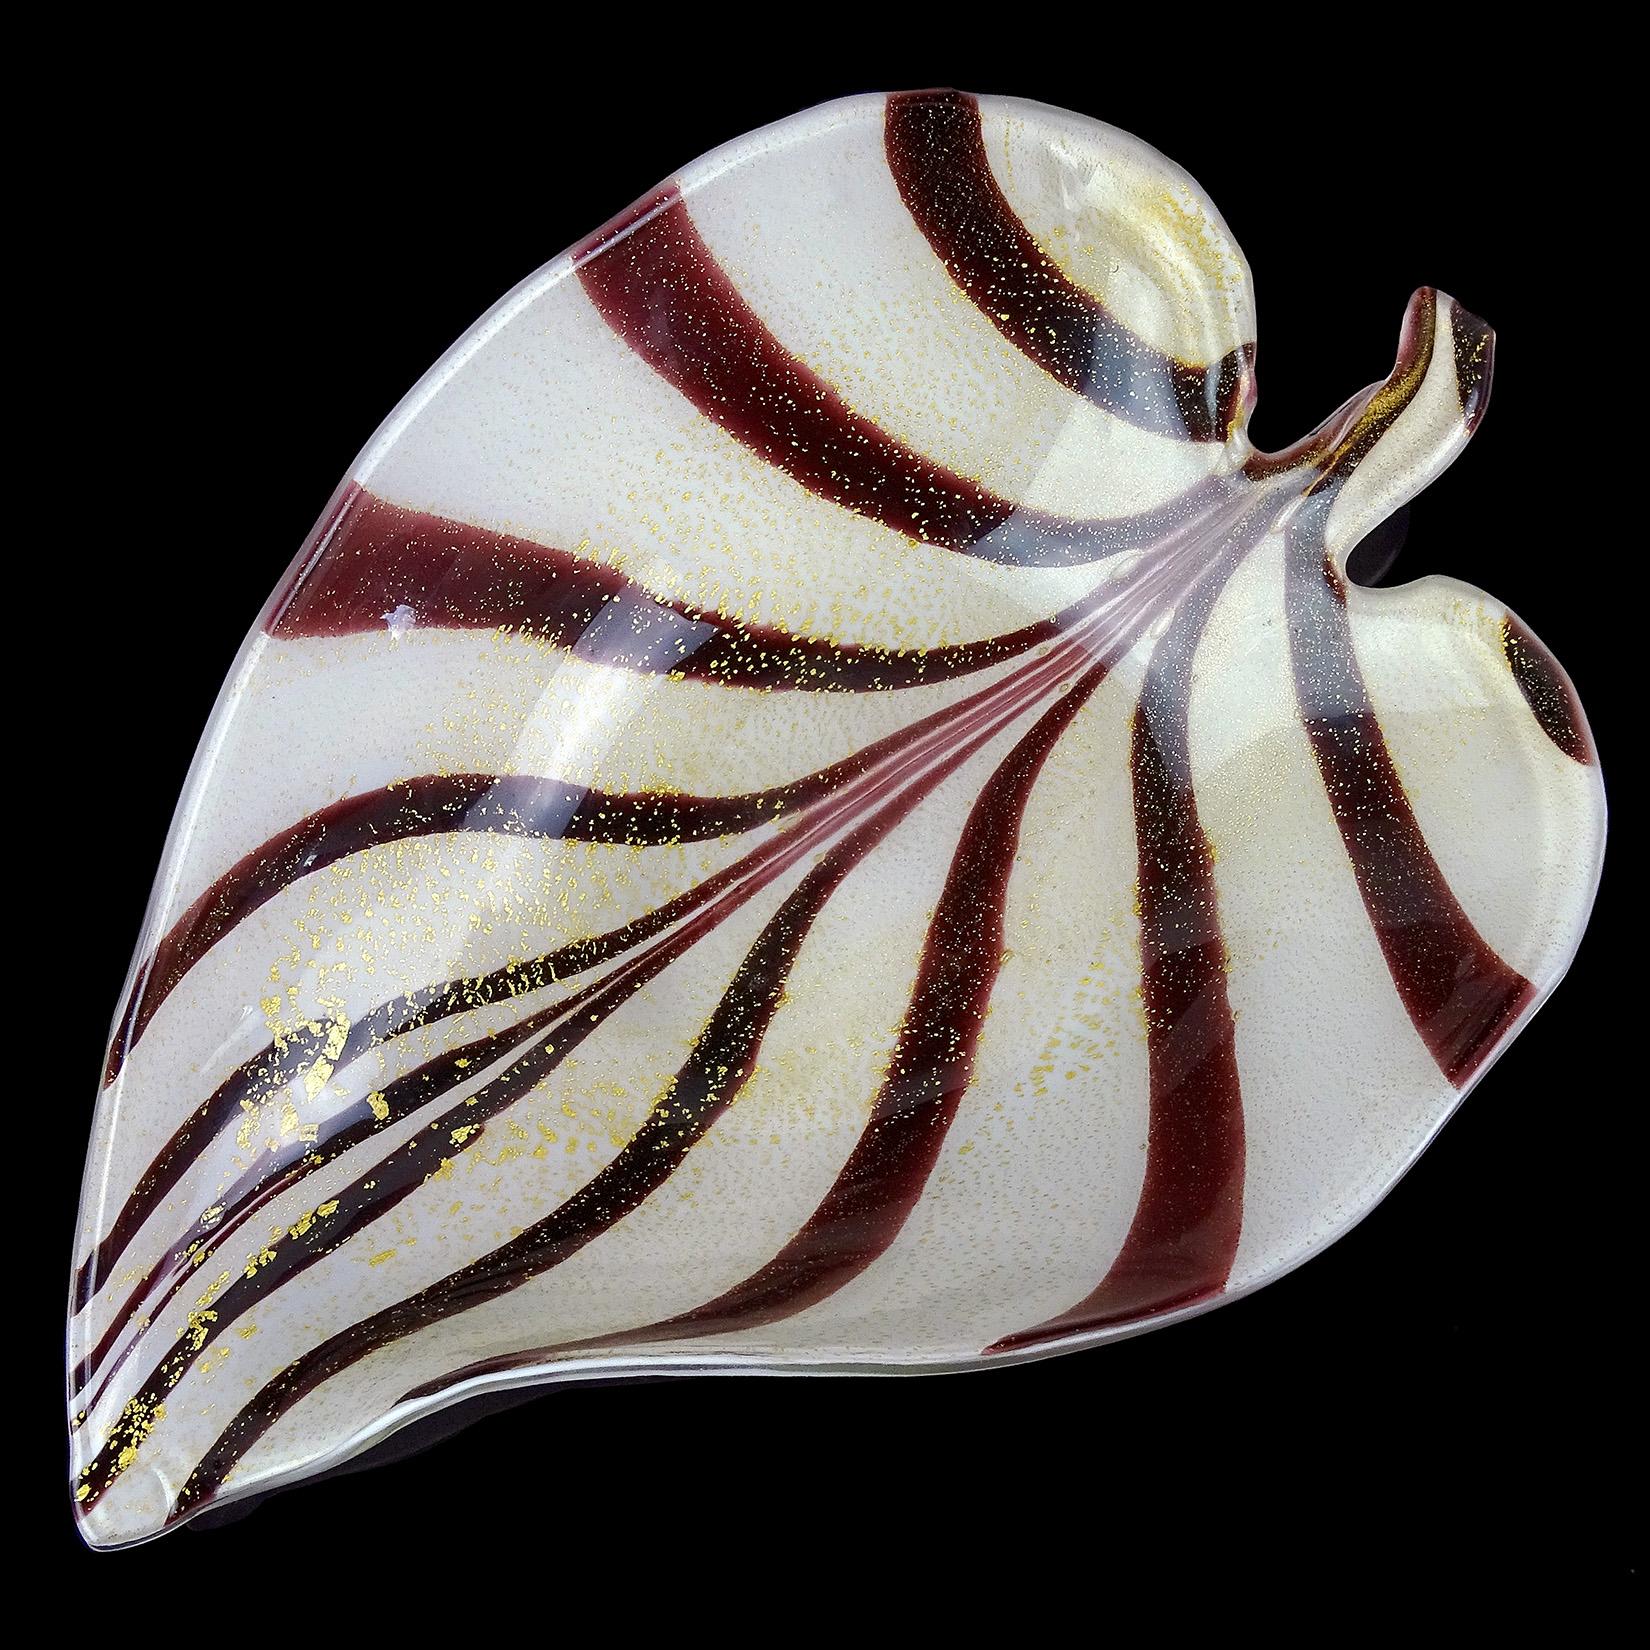 Beautiful vintage Murano hand blown dark wine purple stripes and gold flecks Italian art glass leaf shaped bowl. The bowl is a large size, with feathered design and profusely covered in gold leaf. Would make a great display piece on any table. It